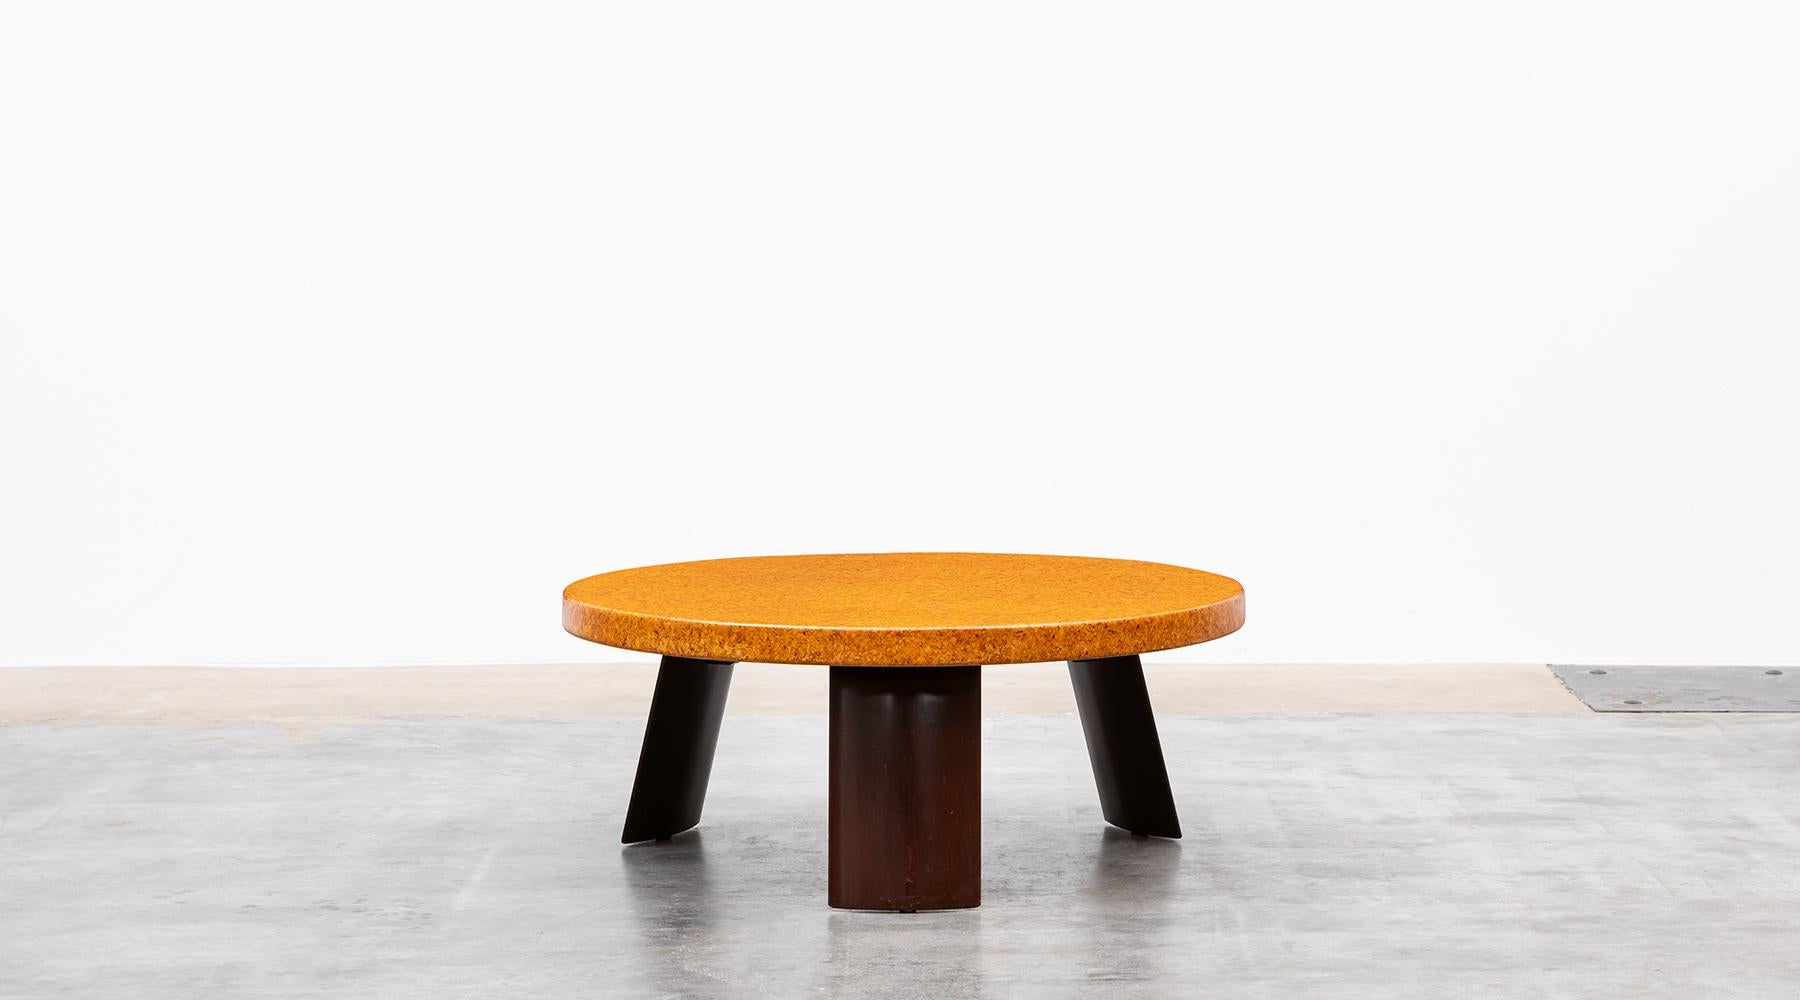 Round coffee table from the middle of the century, designed by Paul Frankl. The tabletop in cork lay on three wooden mahogany legs. This example is numbered on the underside 5018#248. Manufactured in 1951 by Johnson Furniture. 

Viennese Art Deco